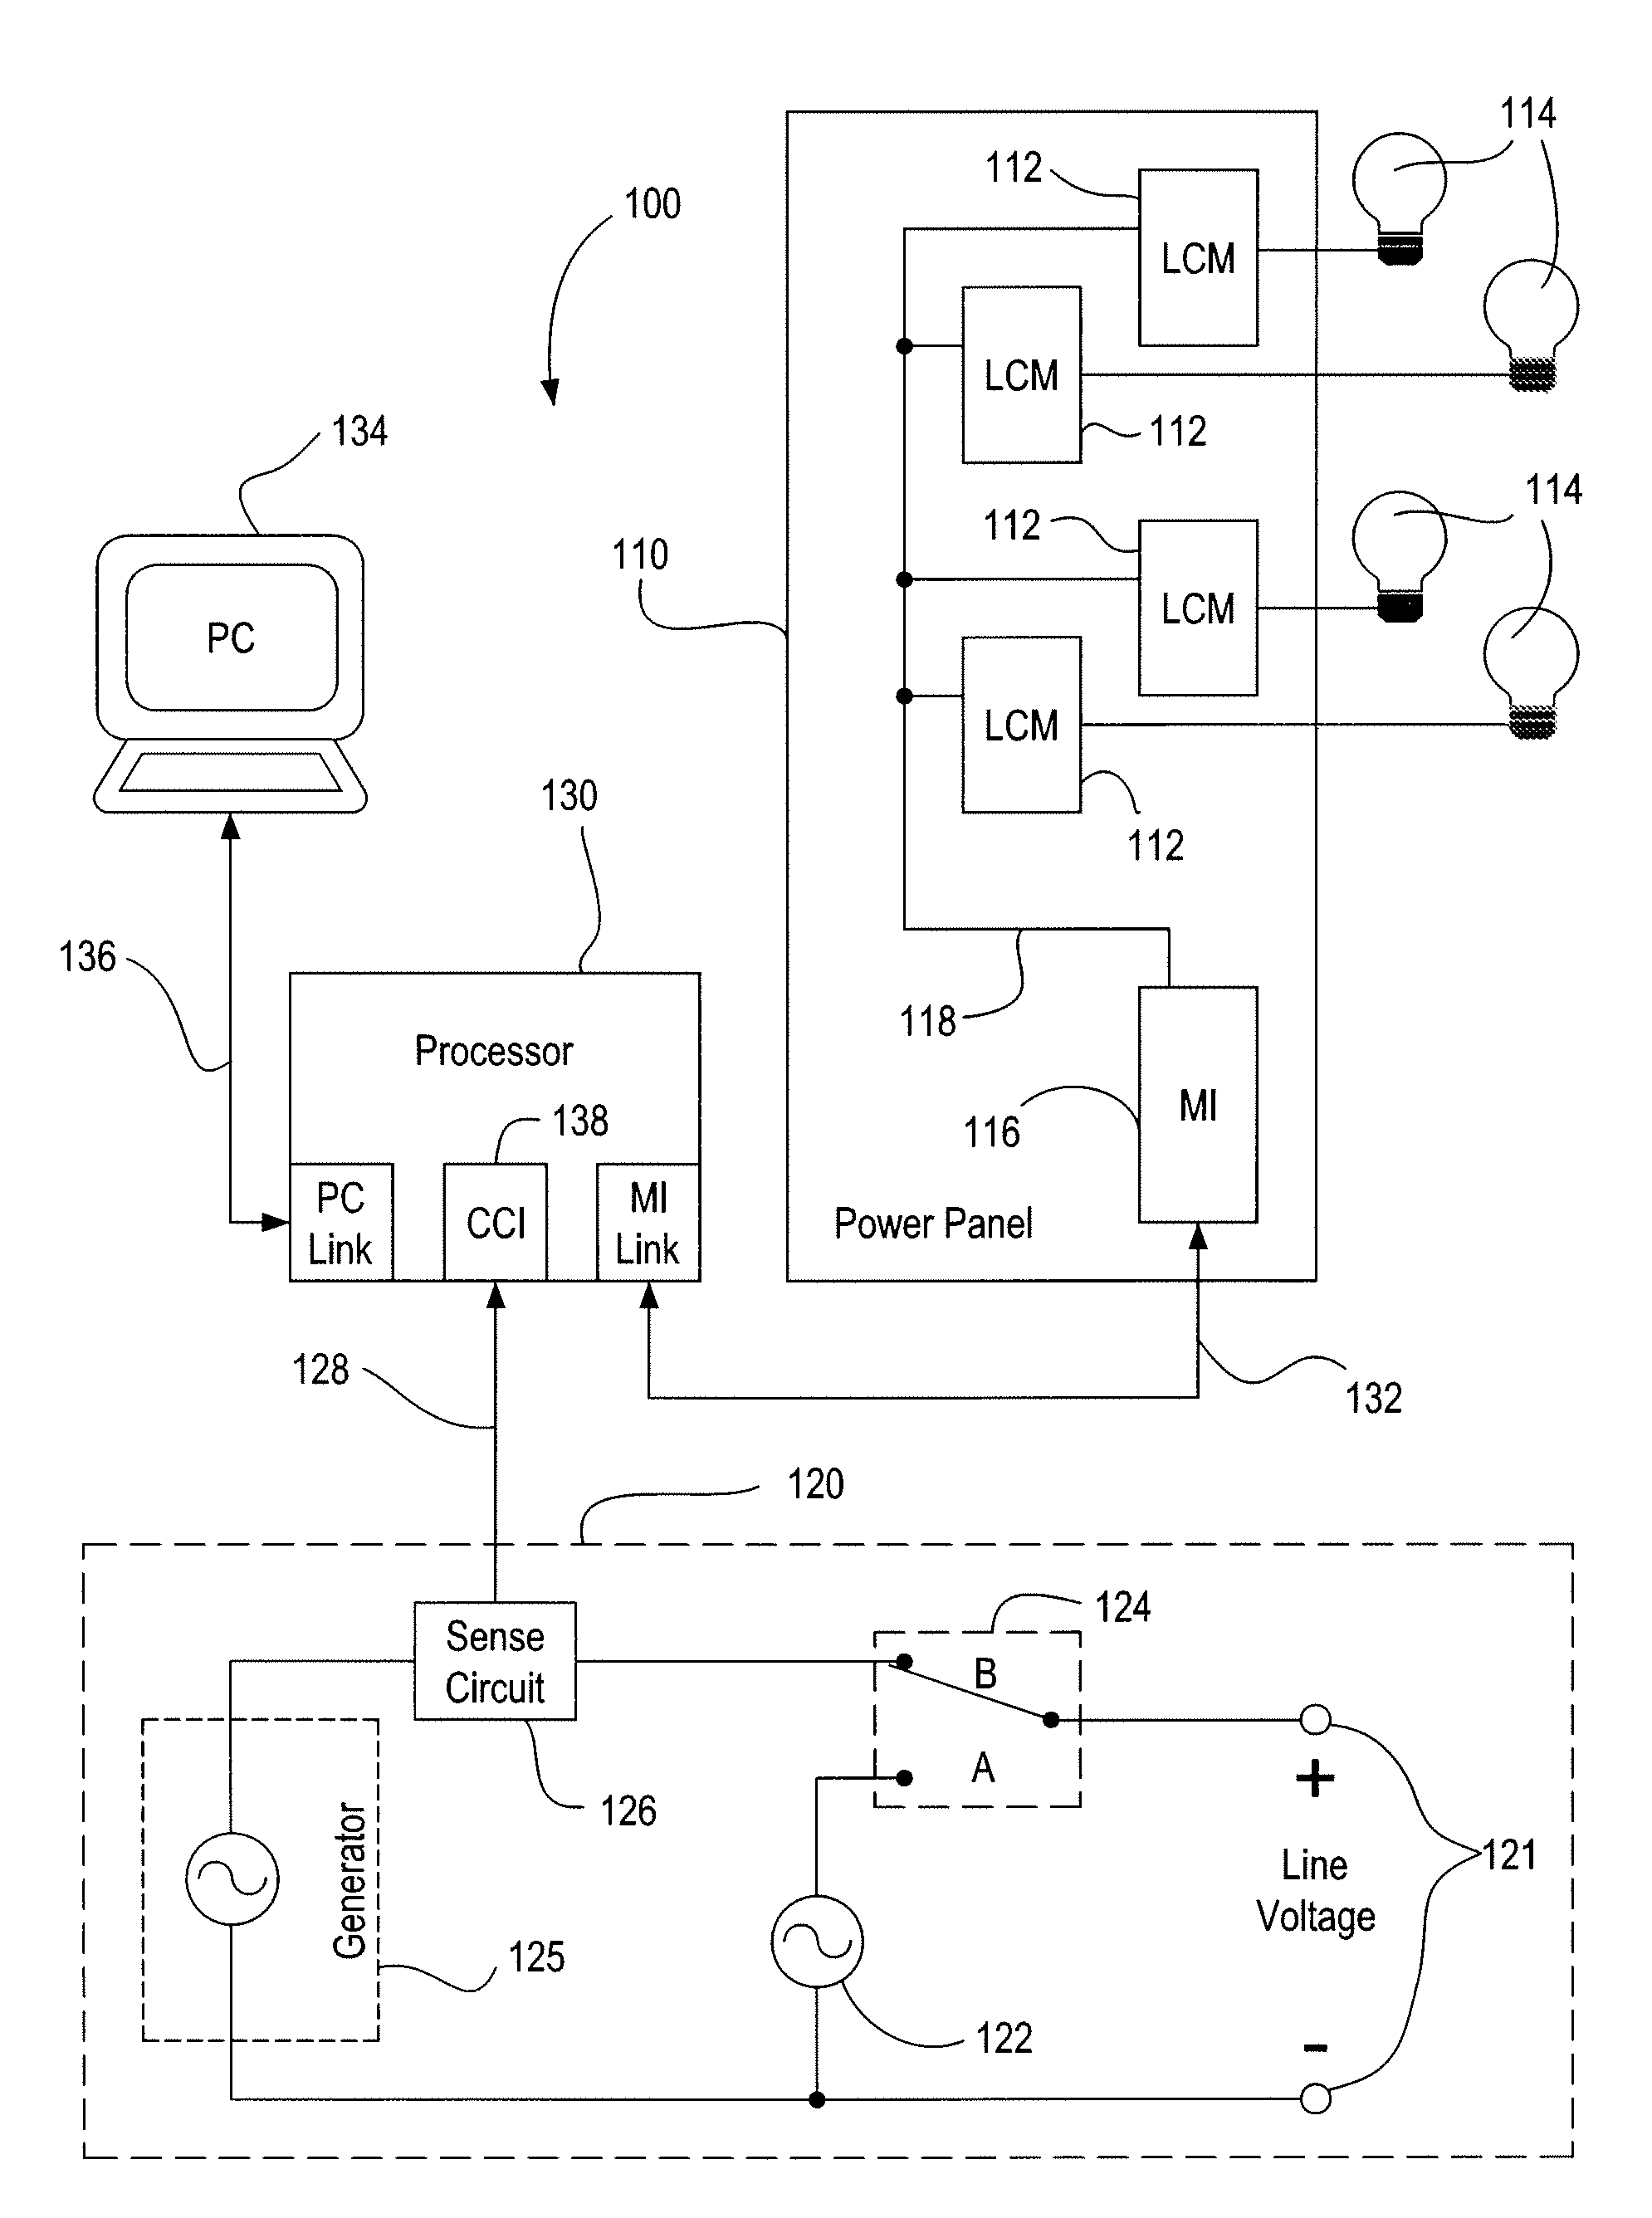 Method of powering up a plurality of loads in sequence